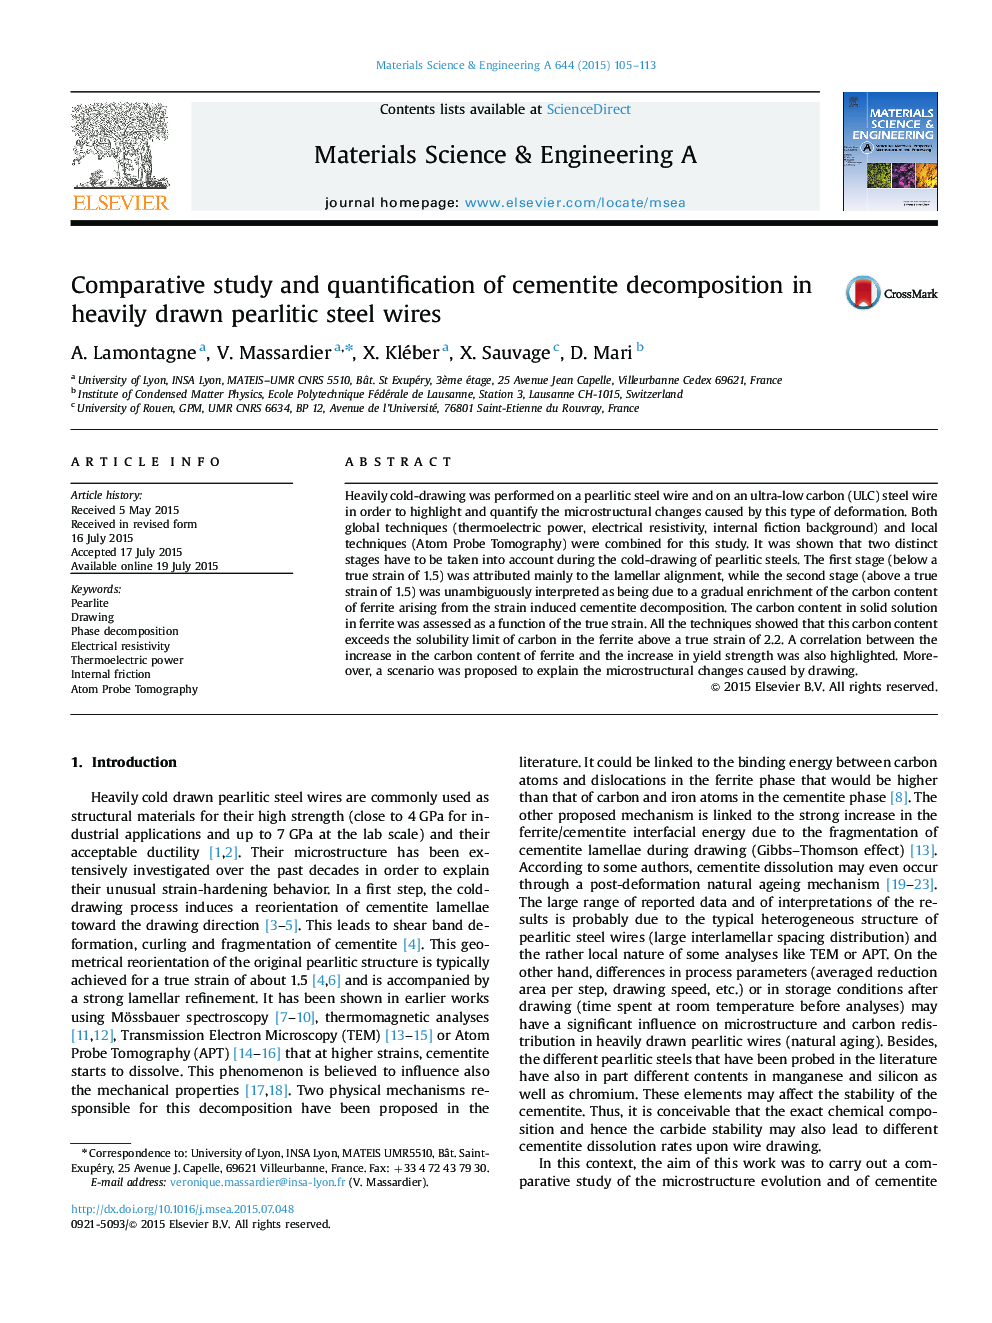 Comparative study and quantification of cementite decomposition in heavily drawn pearlitic steel wires